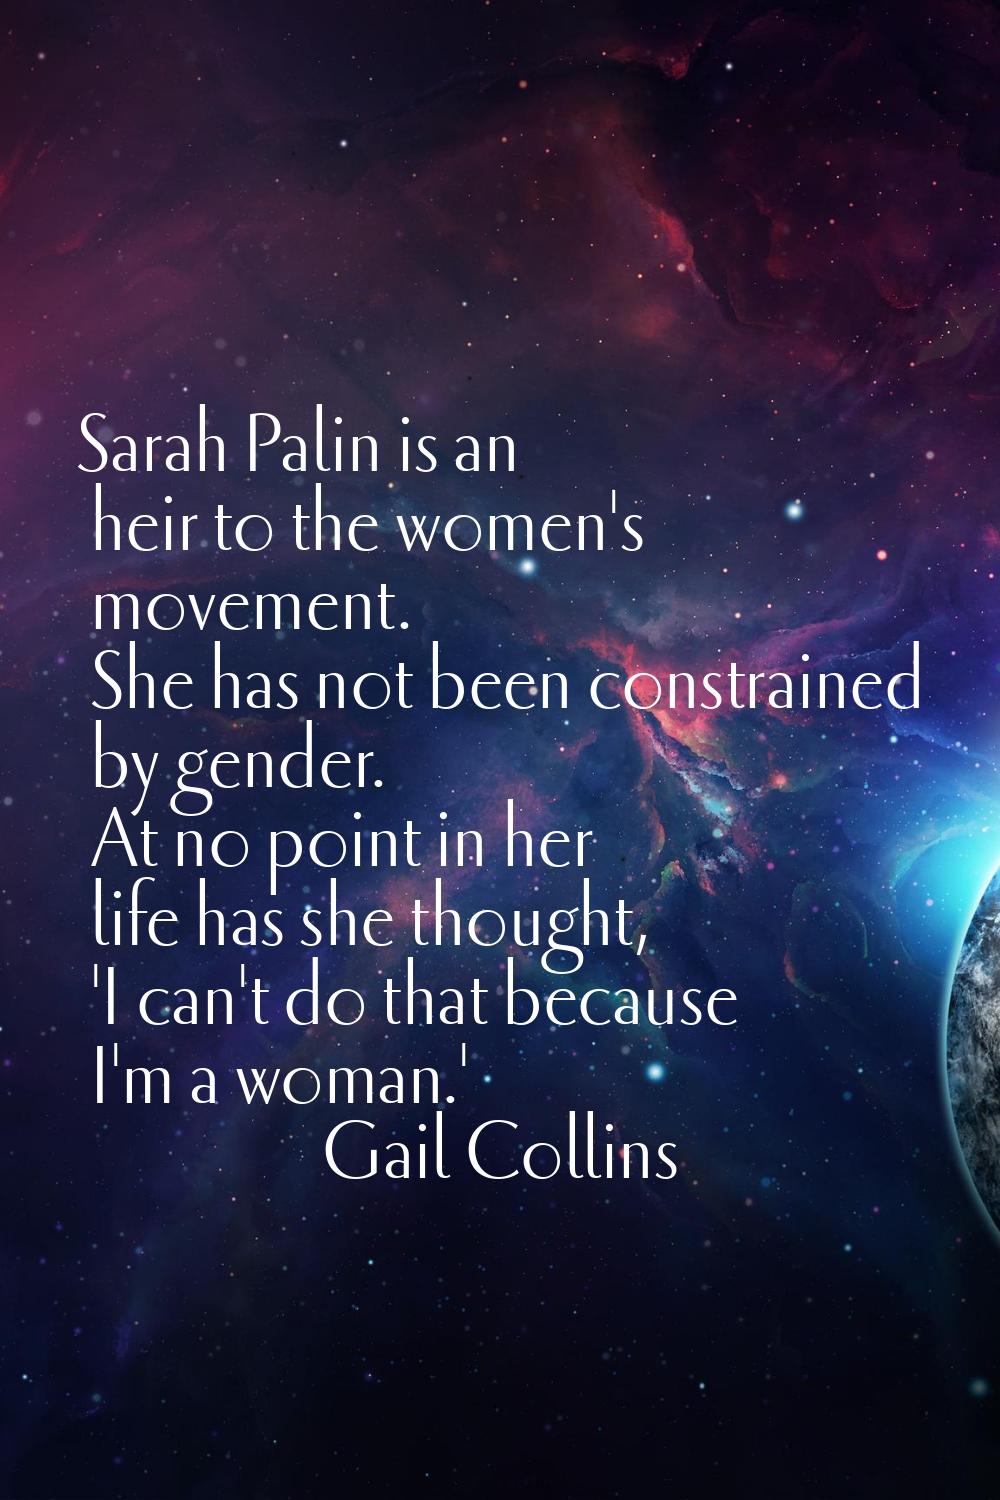 Sarah Palin is an heir to the women's movement. She has not been constrained by gender. At no point